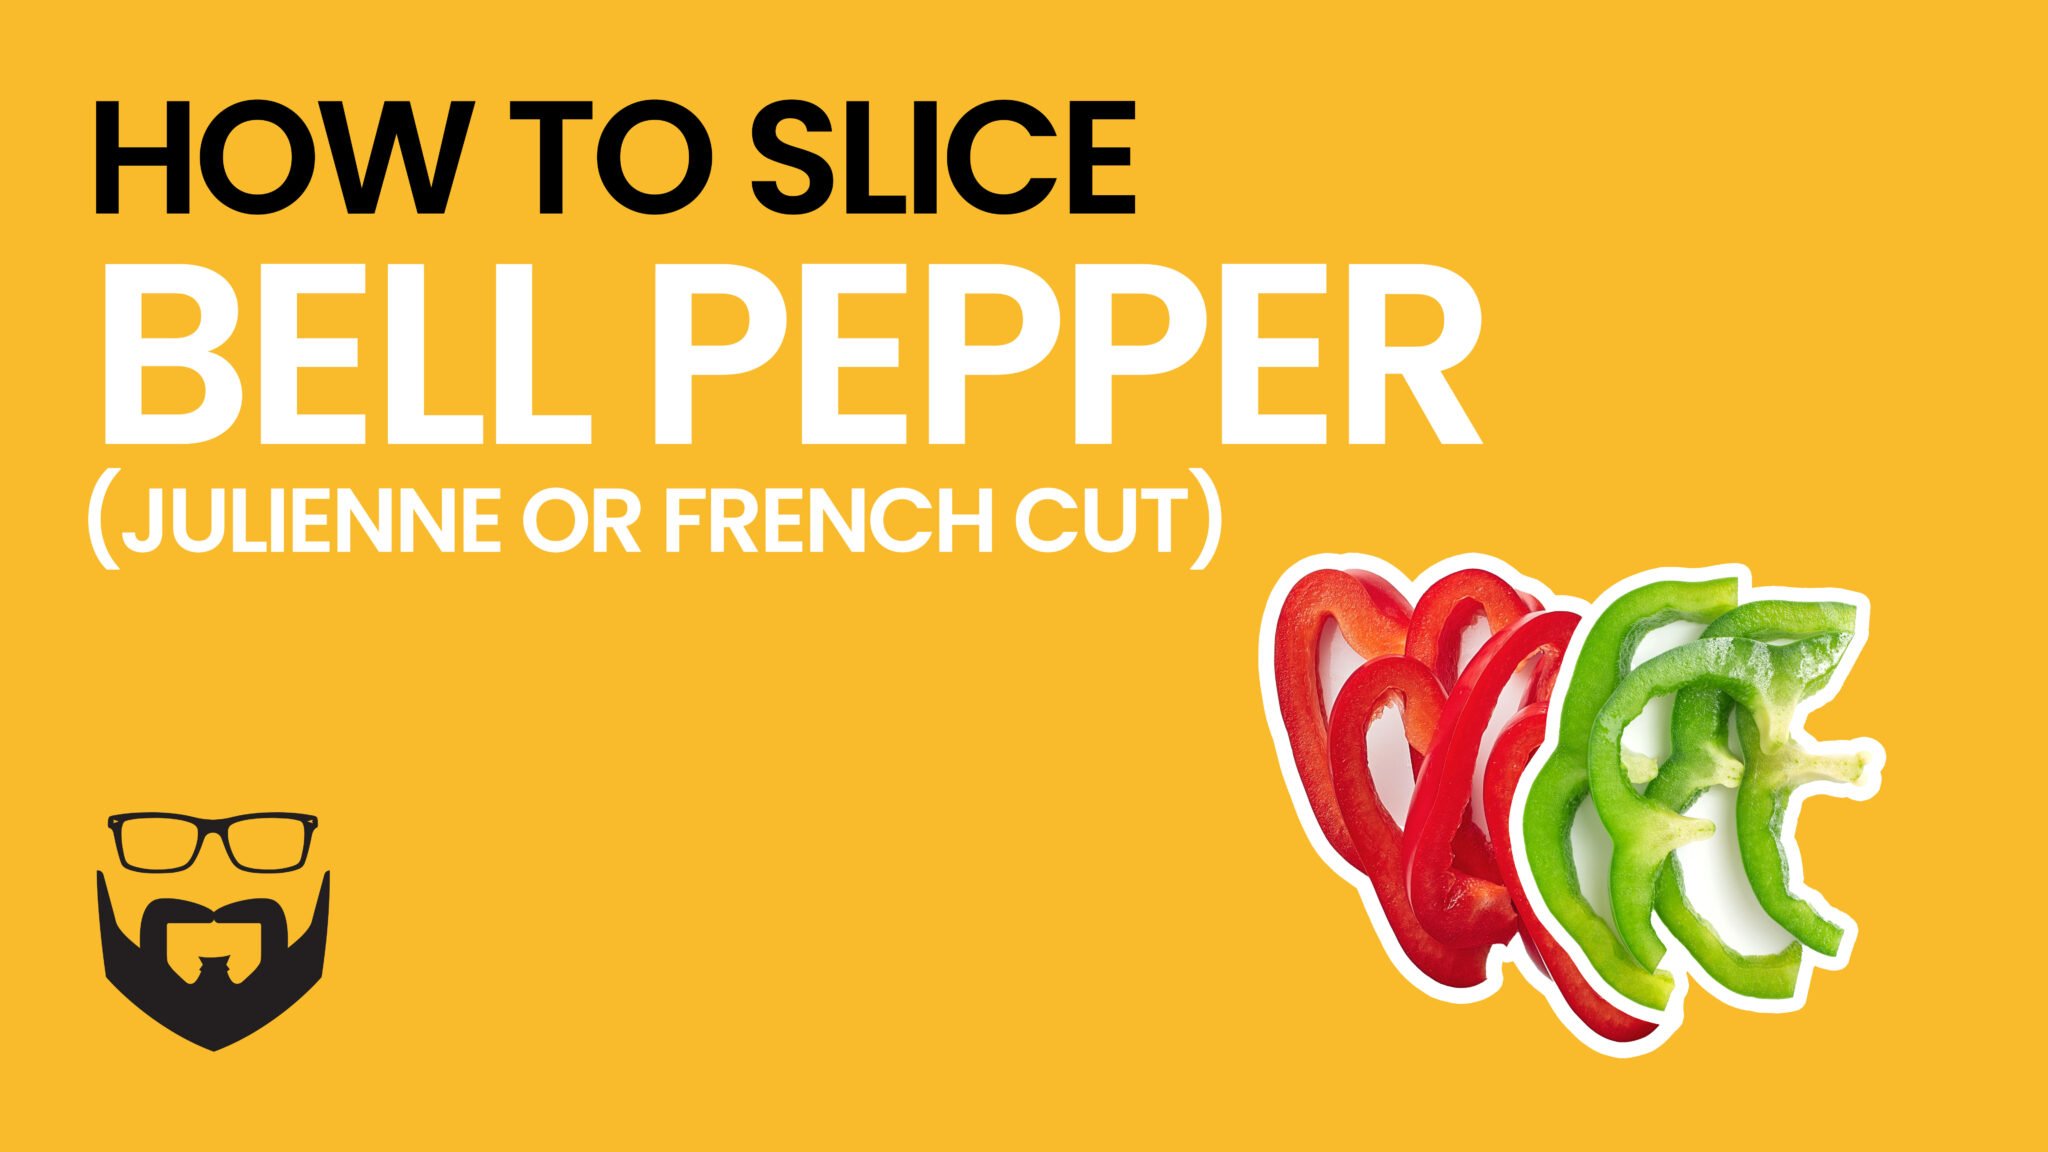 How to Slice Bell Peppers (Julienne or French Cut) Video - Yellow